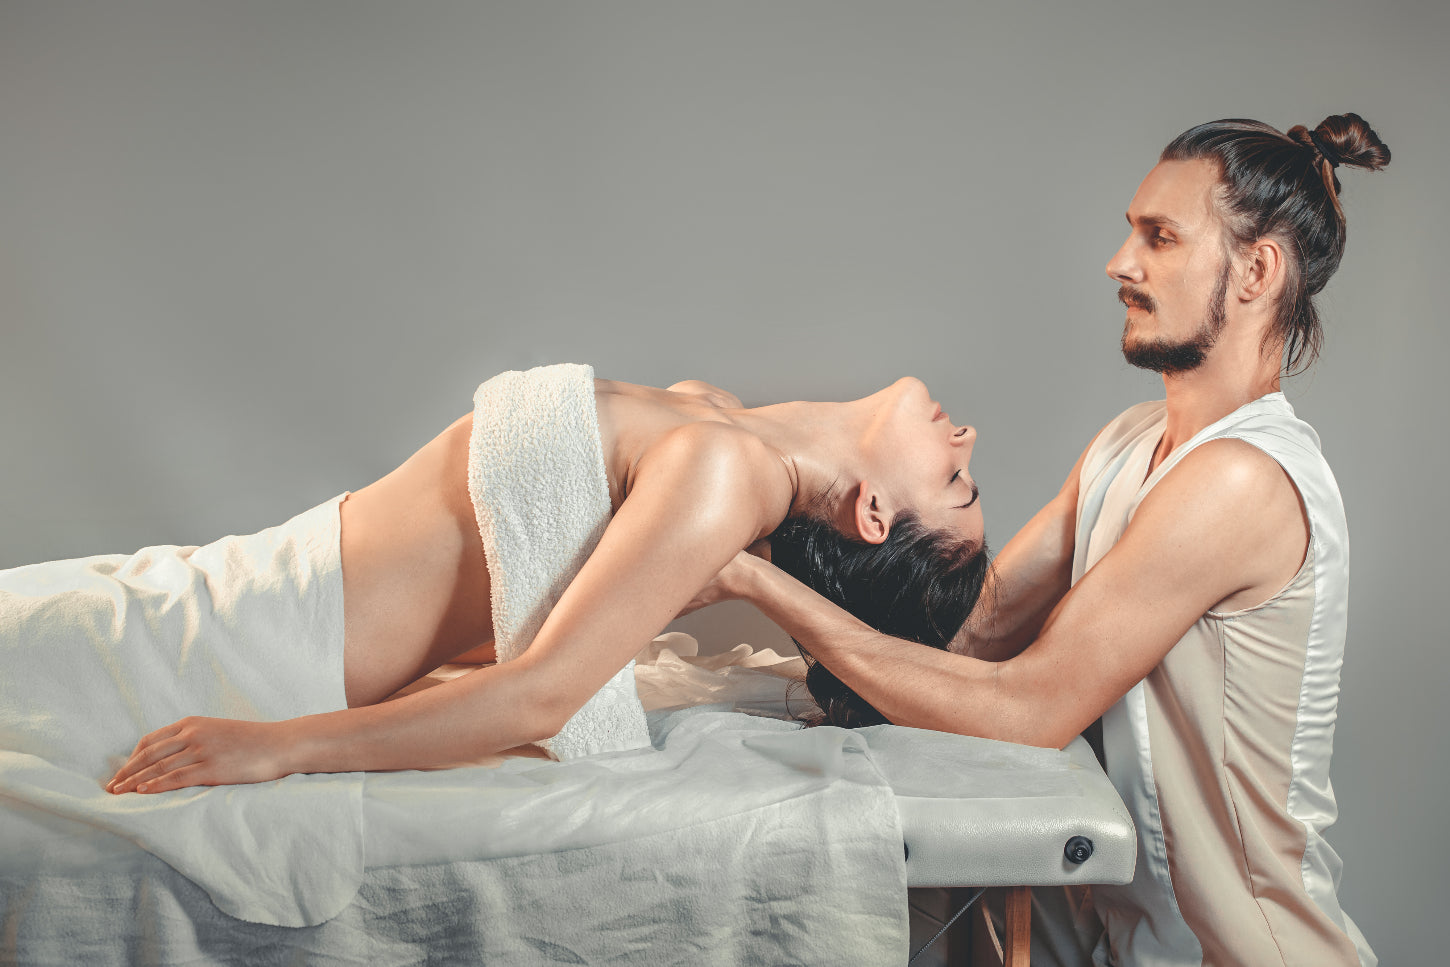 man performs massage and chiropractic adjustment to female client